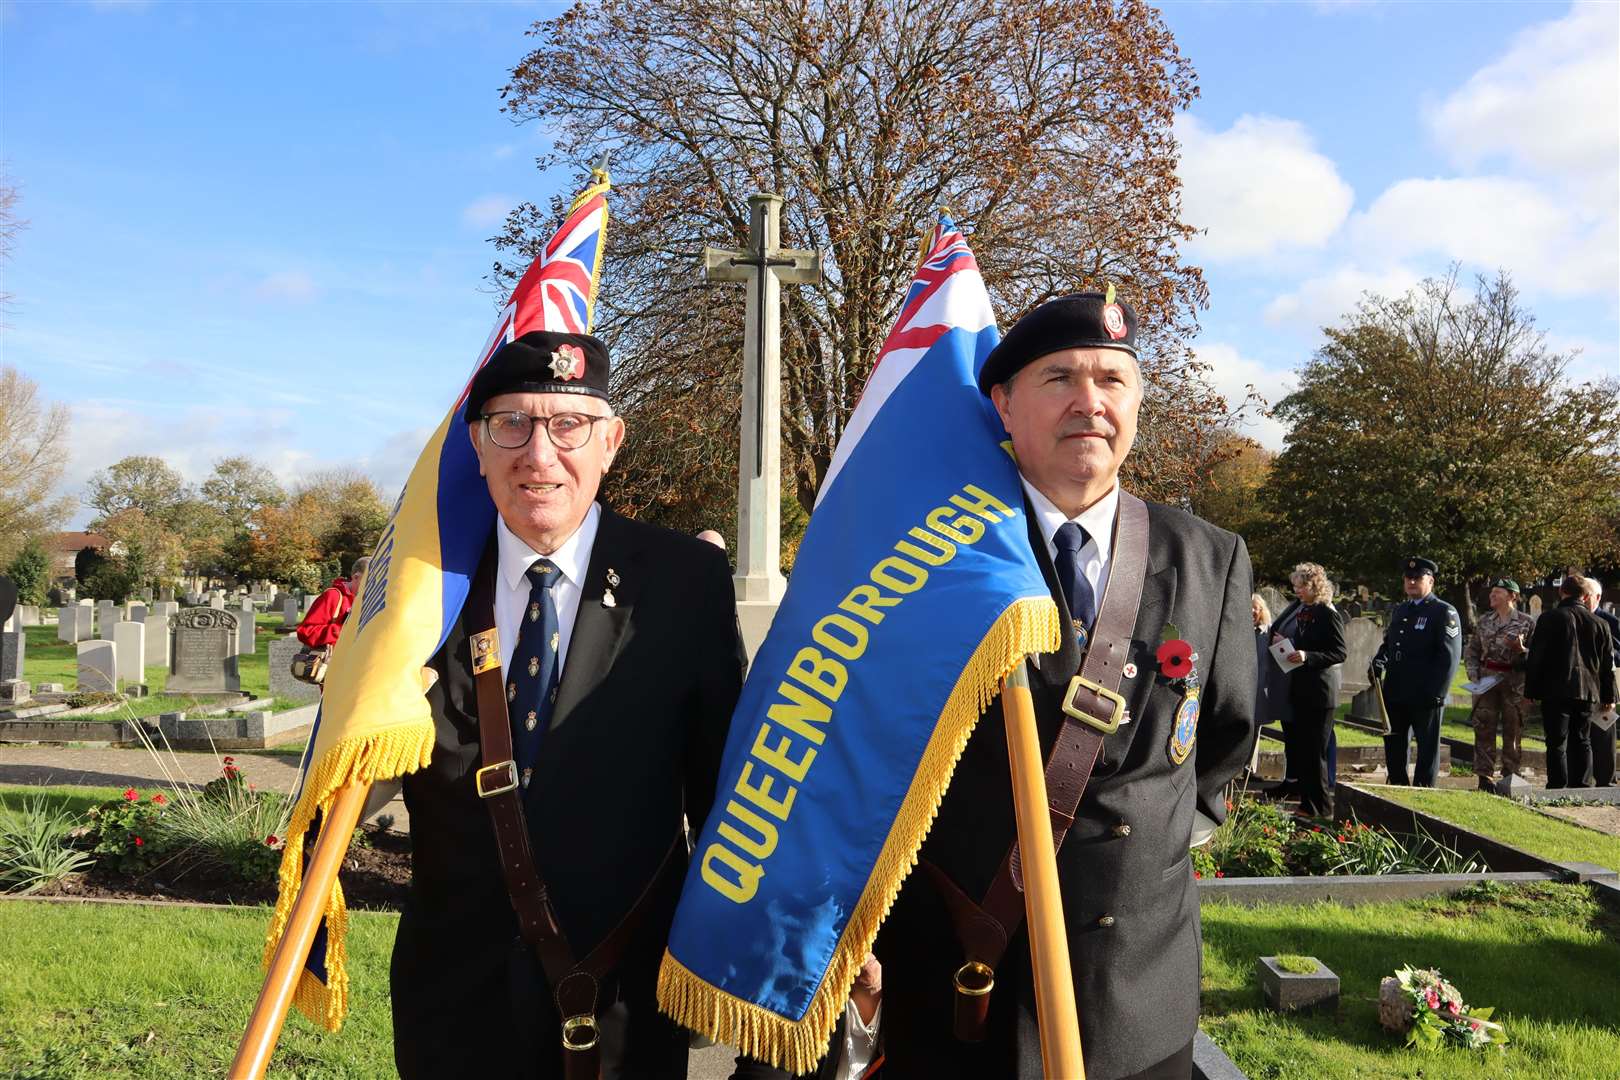 Norman Williams, left, from Sittingbourne chairs the Sheppey Royal British Legion branch and David Ingram is chairman of HMS Wildfire and runs the Rose Inn at Queenborough. Both took part in the Armistice Day service in the Sheppey Cemetery, Halfway, on Friday